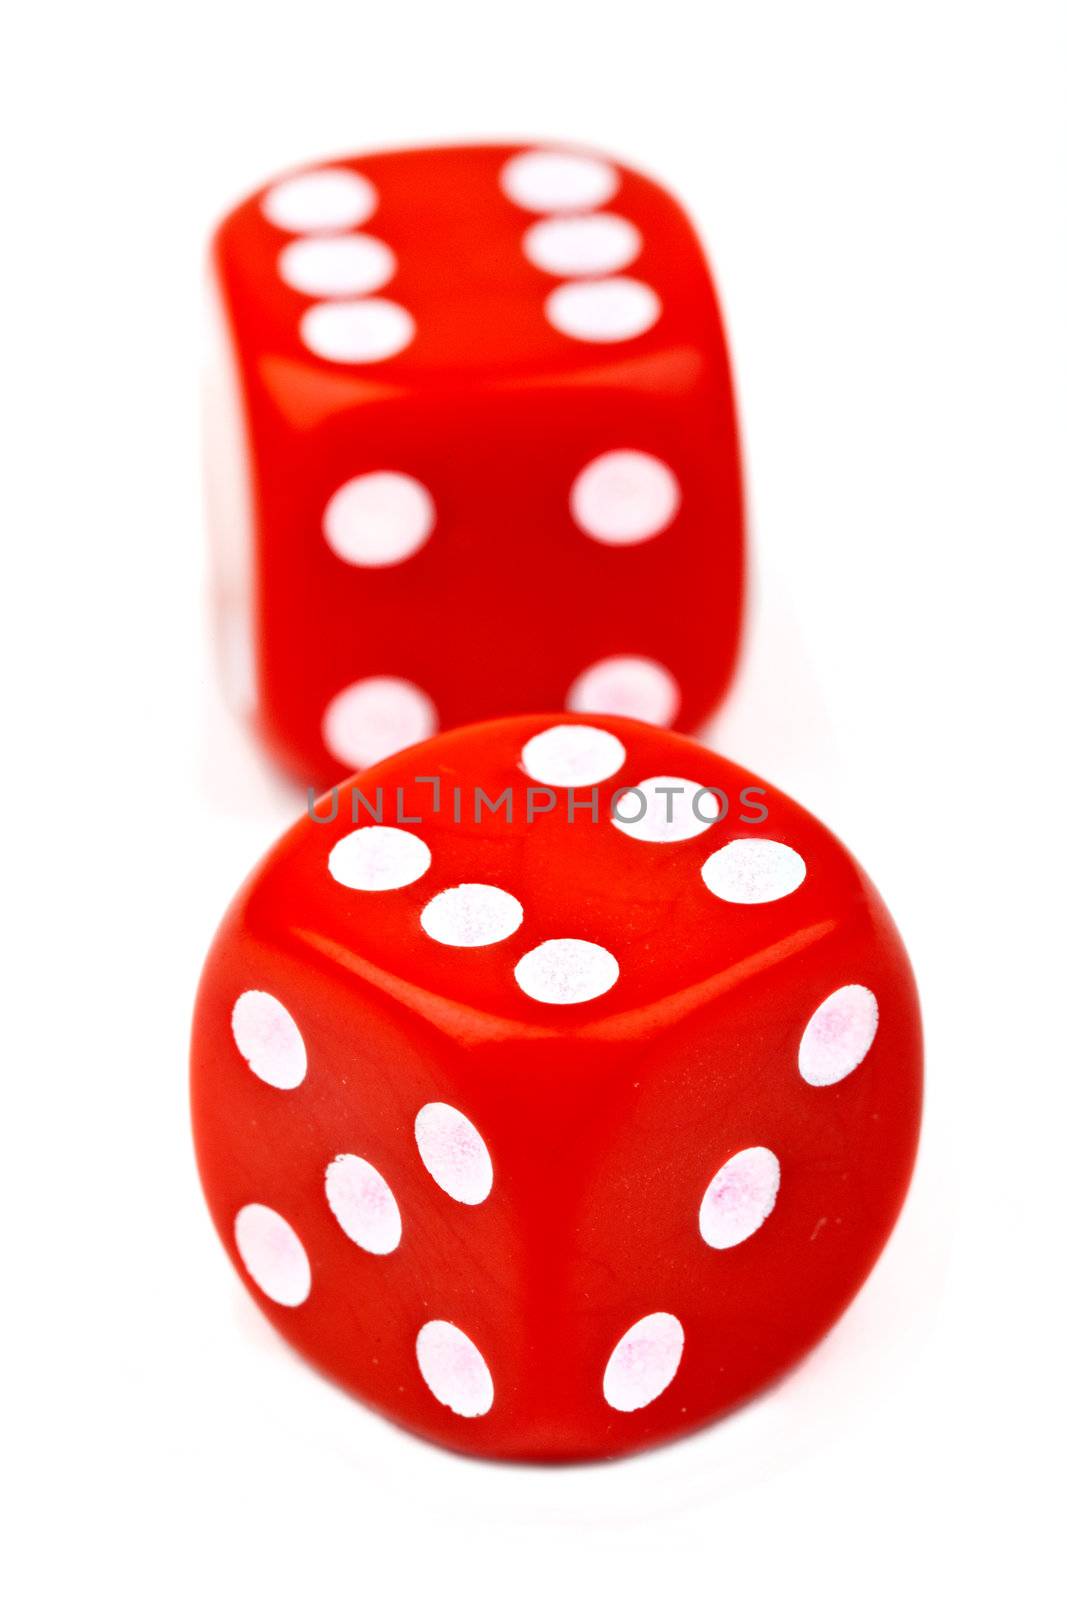 Red Dice over a plain white background.